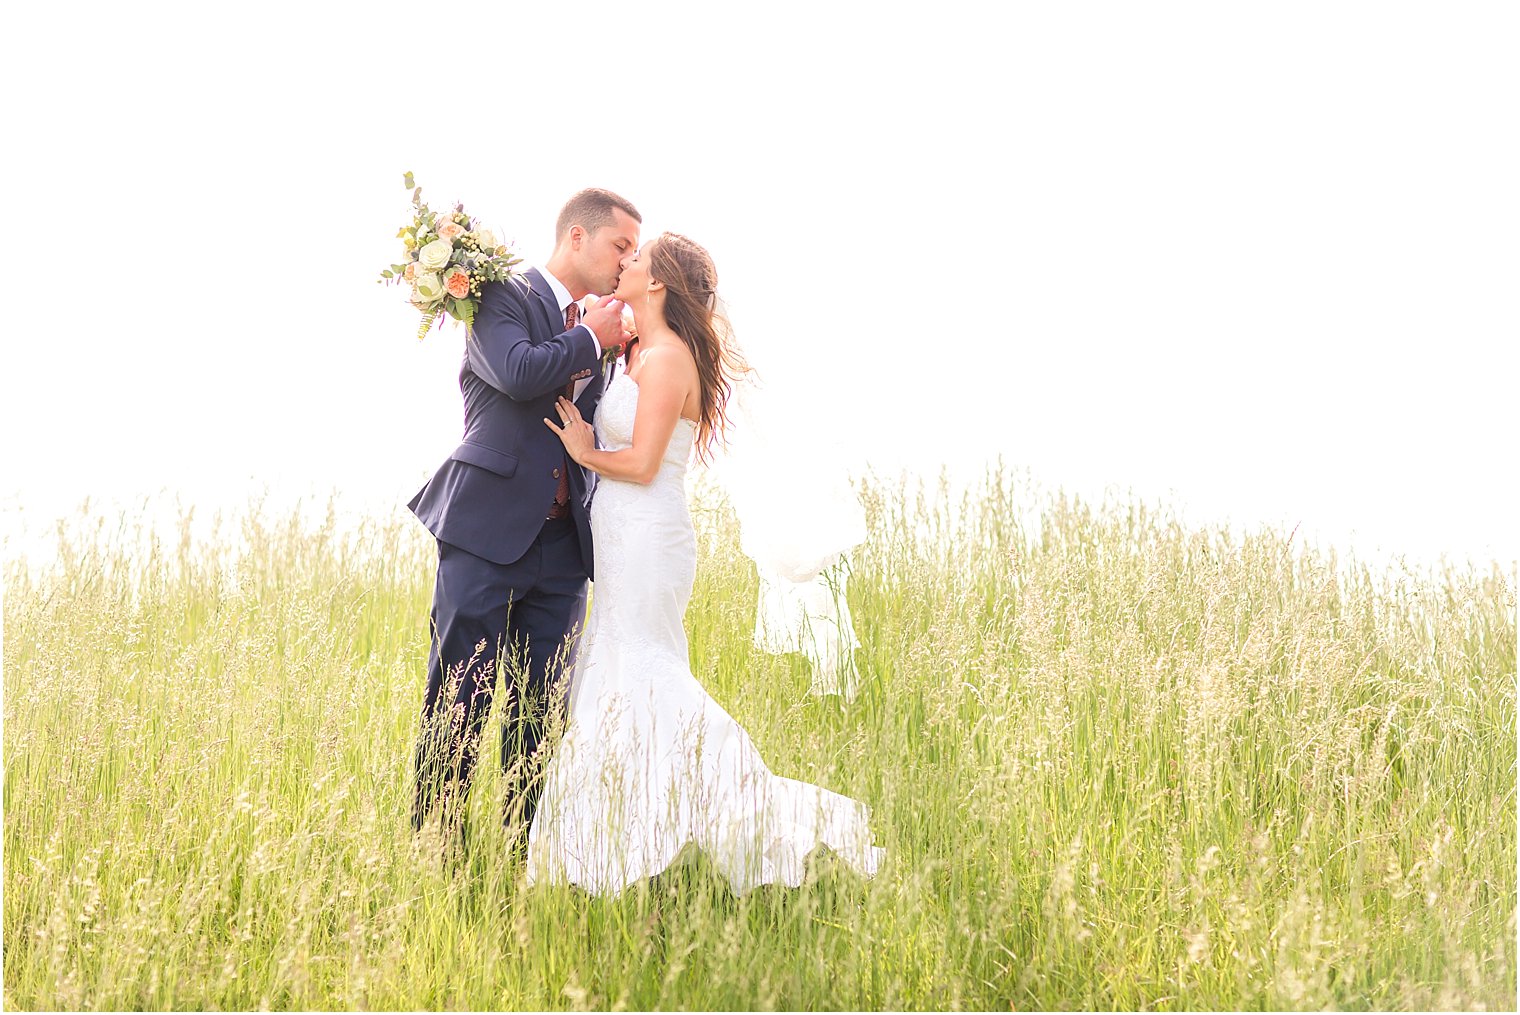 Romantic bride and groom in a field | Photo by Idalia Photography